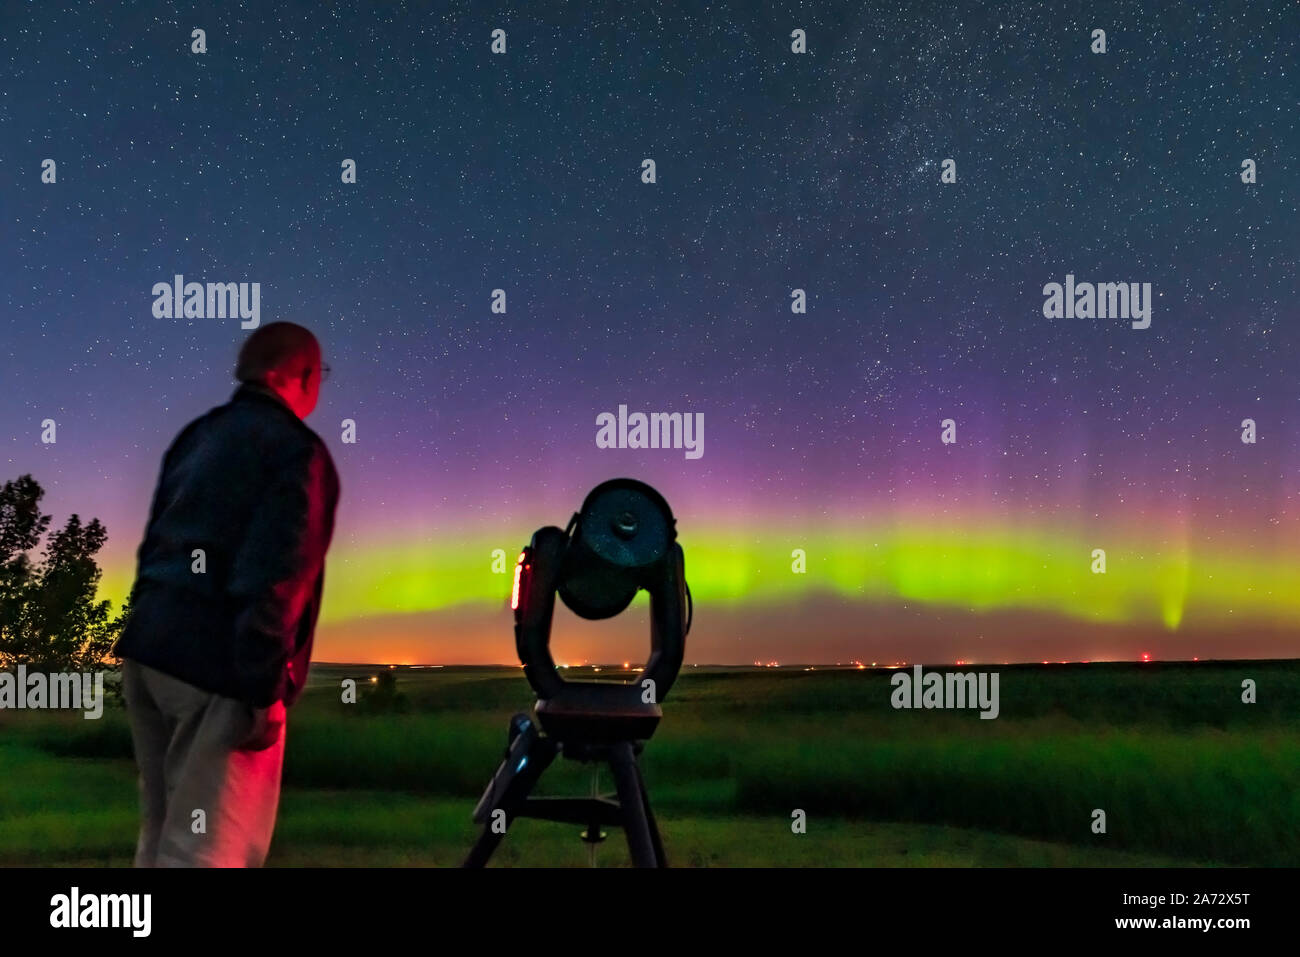 A selfie of me with the Celestron C8 telescope, with an aurora in the north, for a book illustration. Taken July 21, 2019 from the backyard on a very Stock Photo